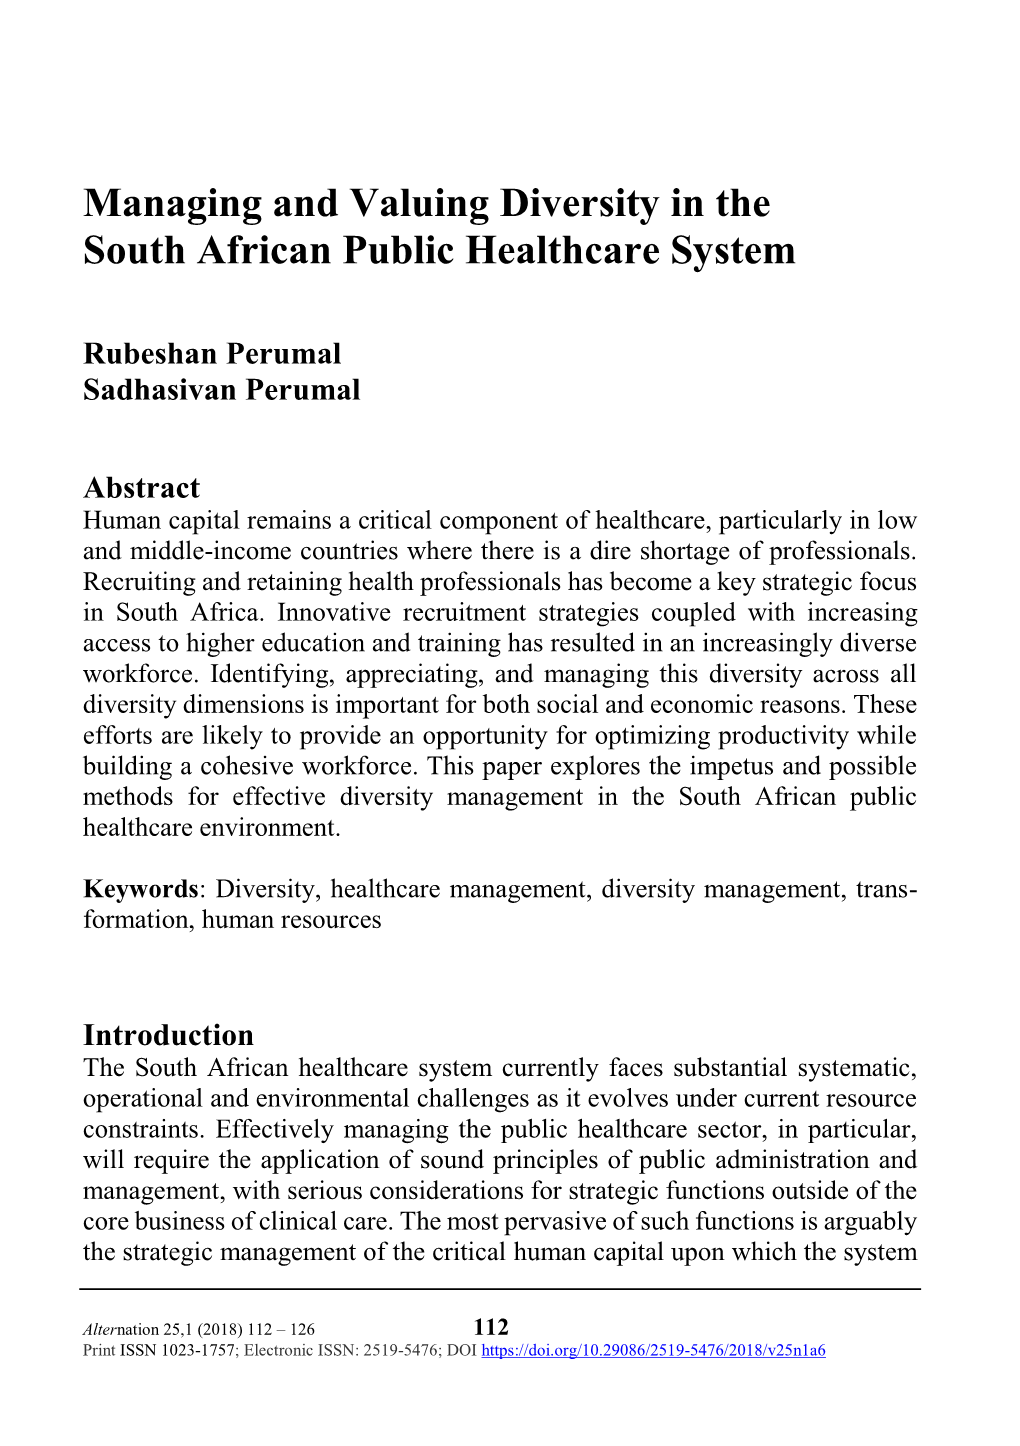 Managing and Valuing Diversity in the South African Public Healthcare System